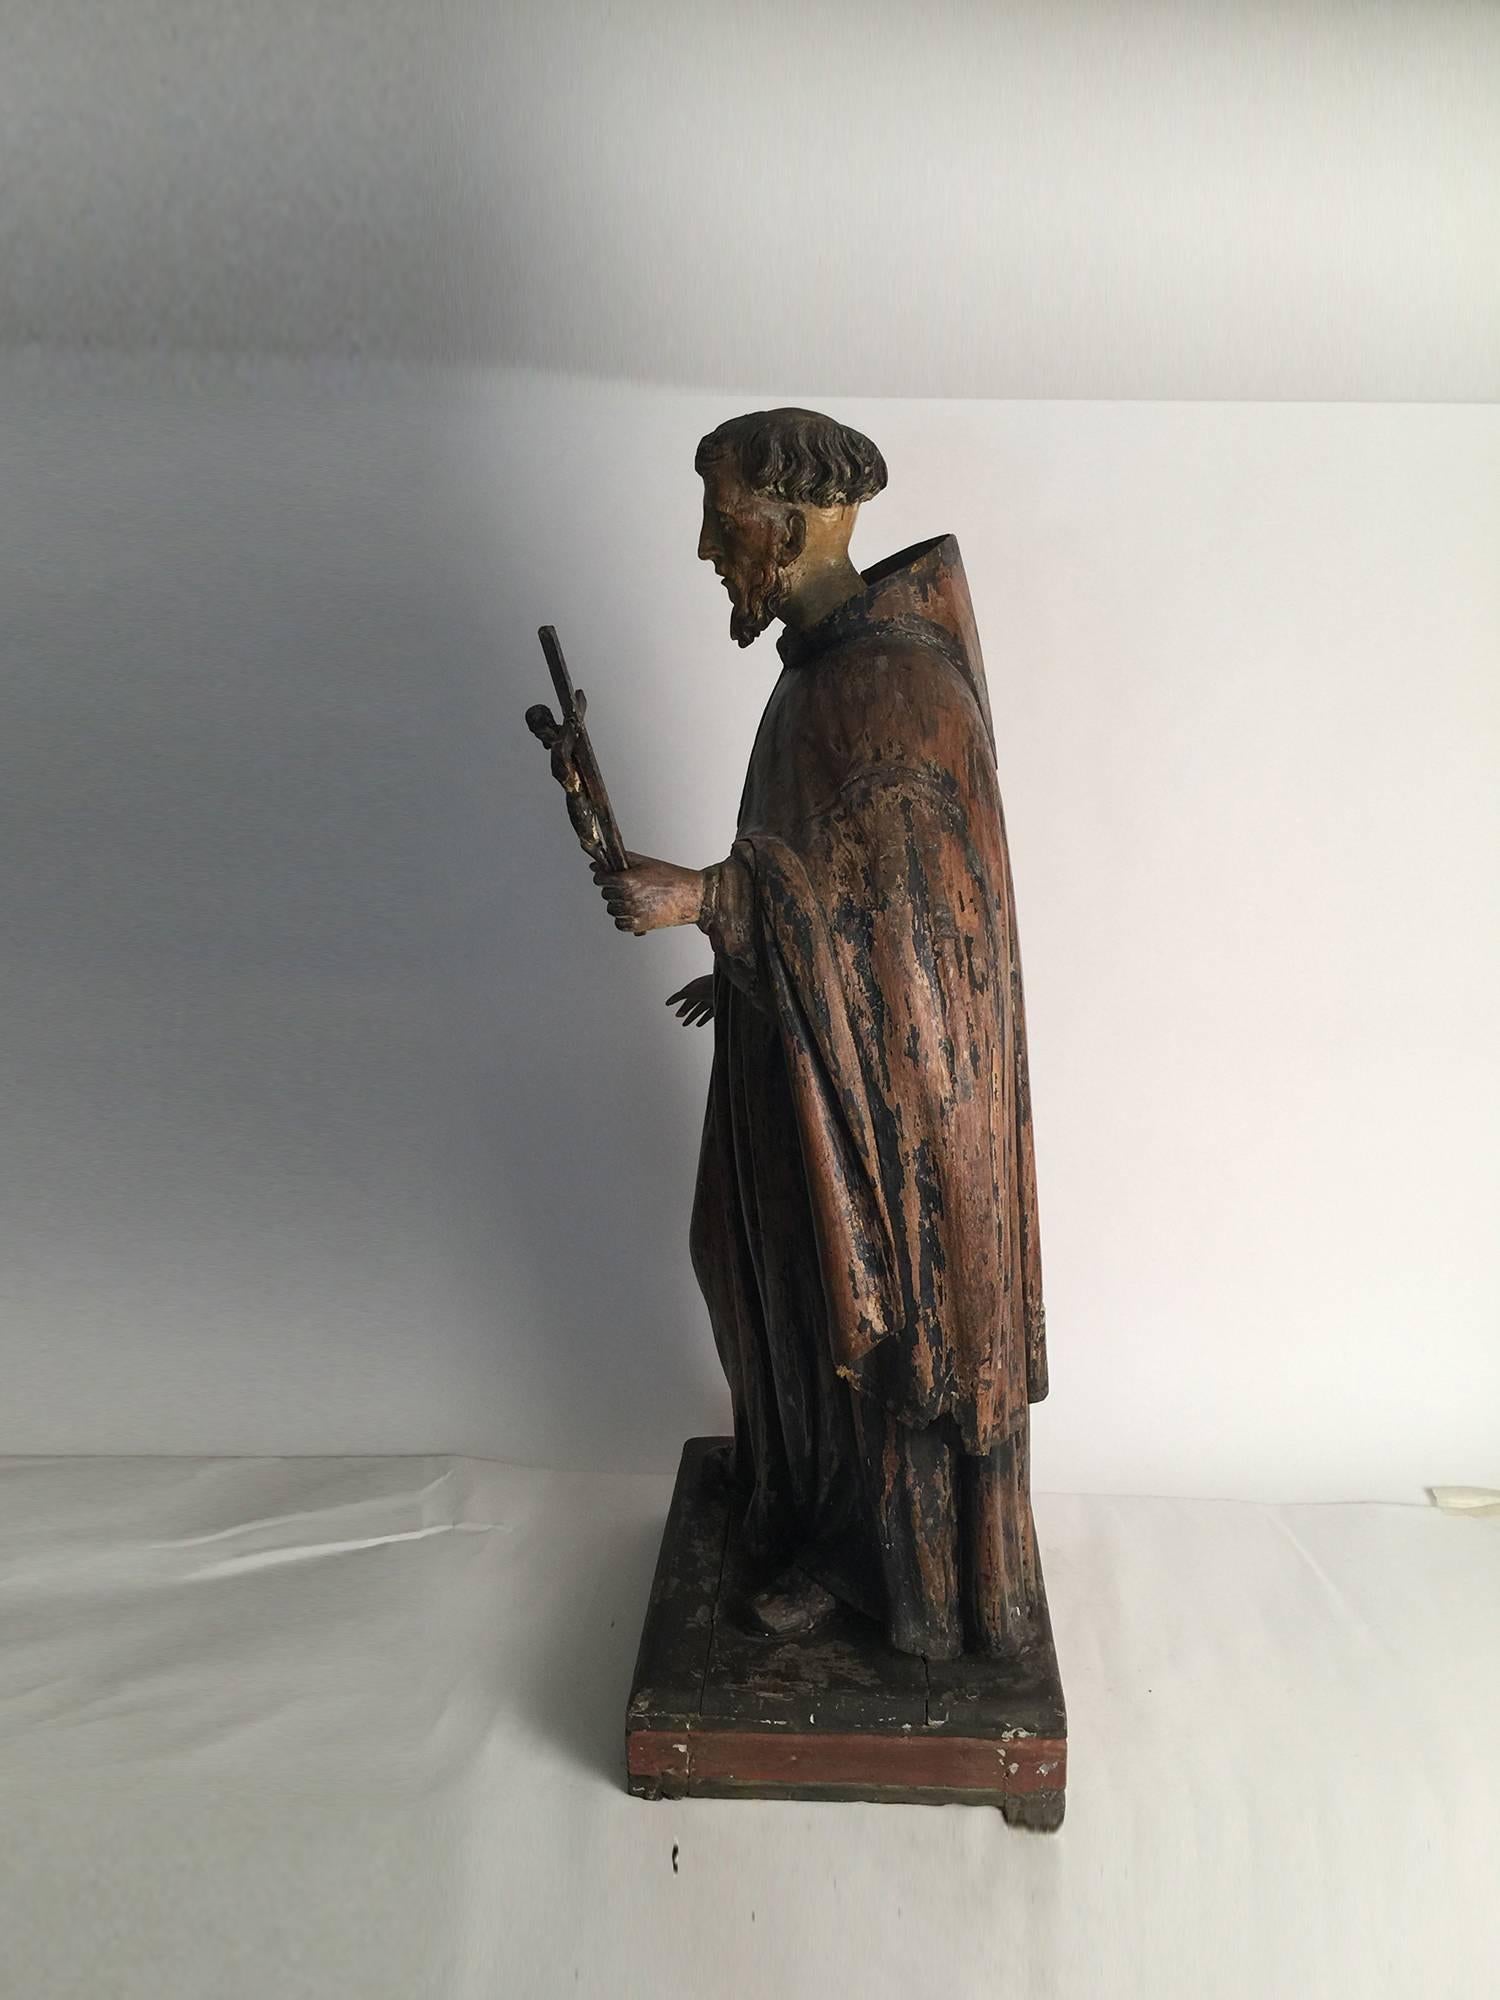 Amazing 18th century large hand carved polychrome figure of Saint Anthony. Original paint surface with some age cracks. The head and crucifix is removable. Dimensions: 38.5” H x 15” W x 12.5